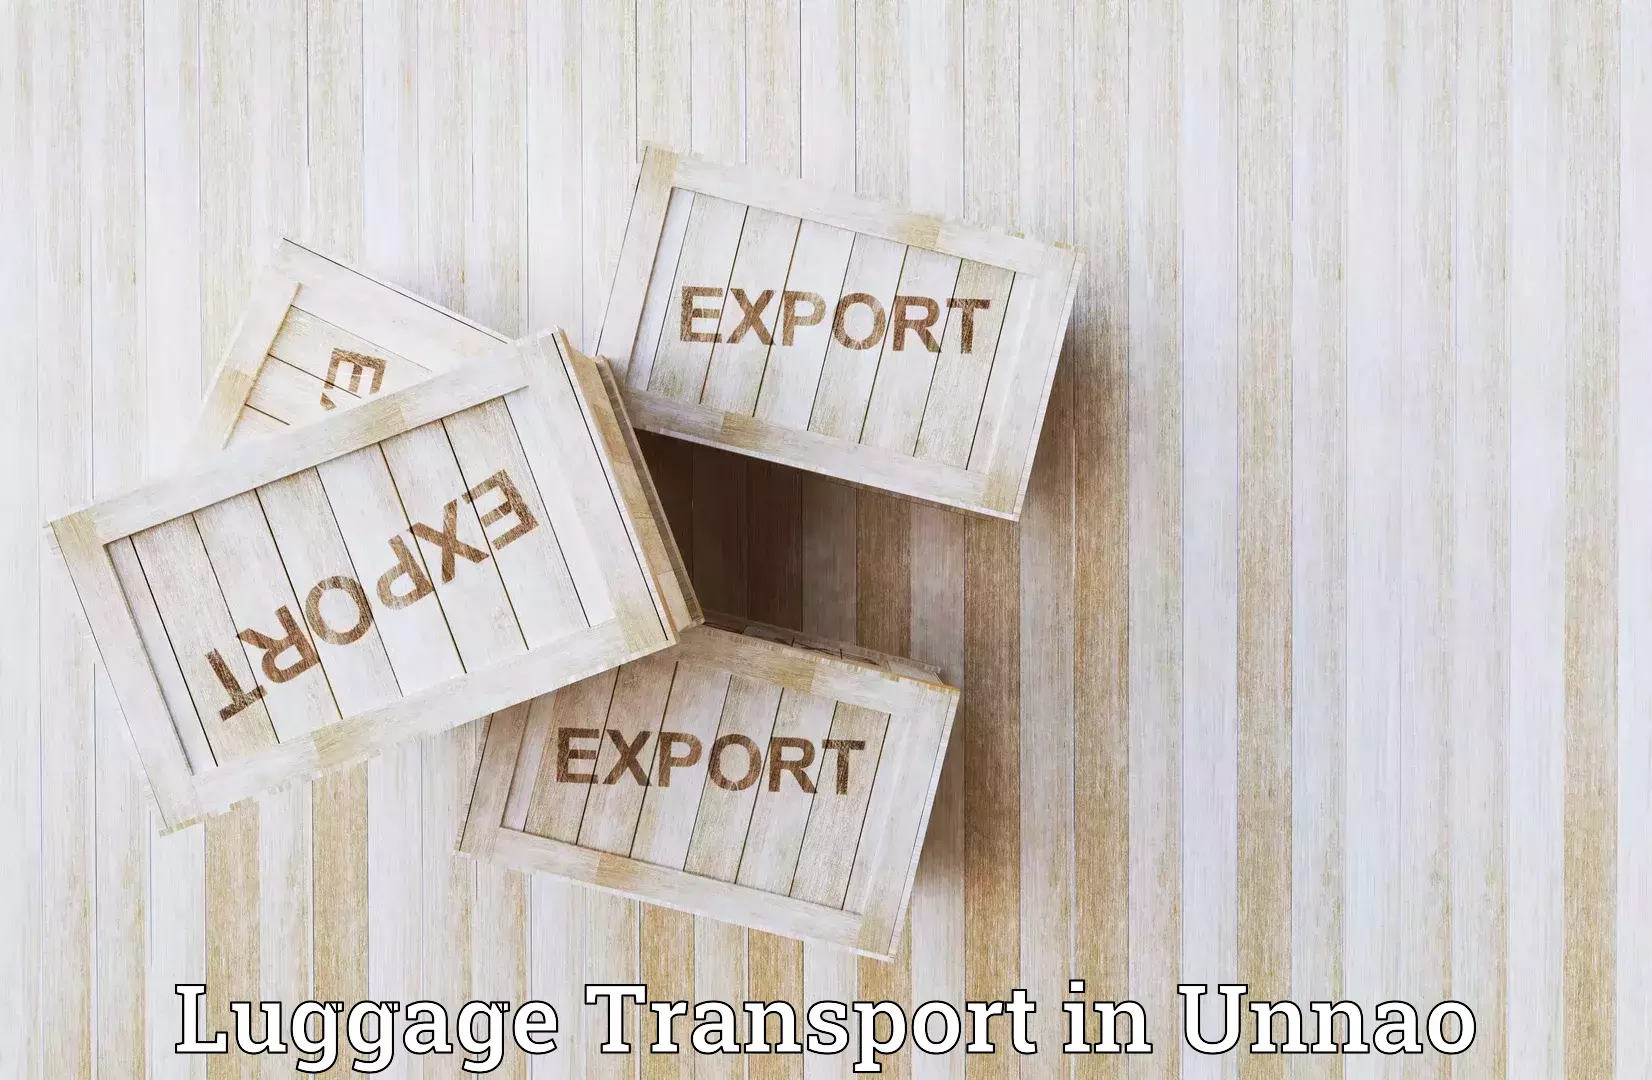 Luggage transport rates calculator in Unnao